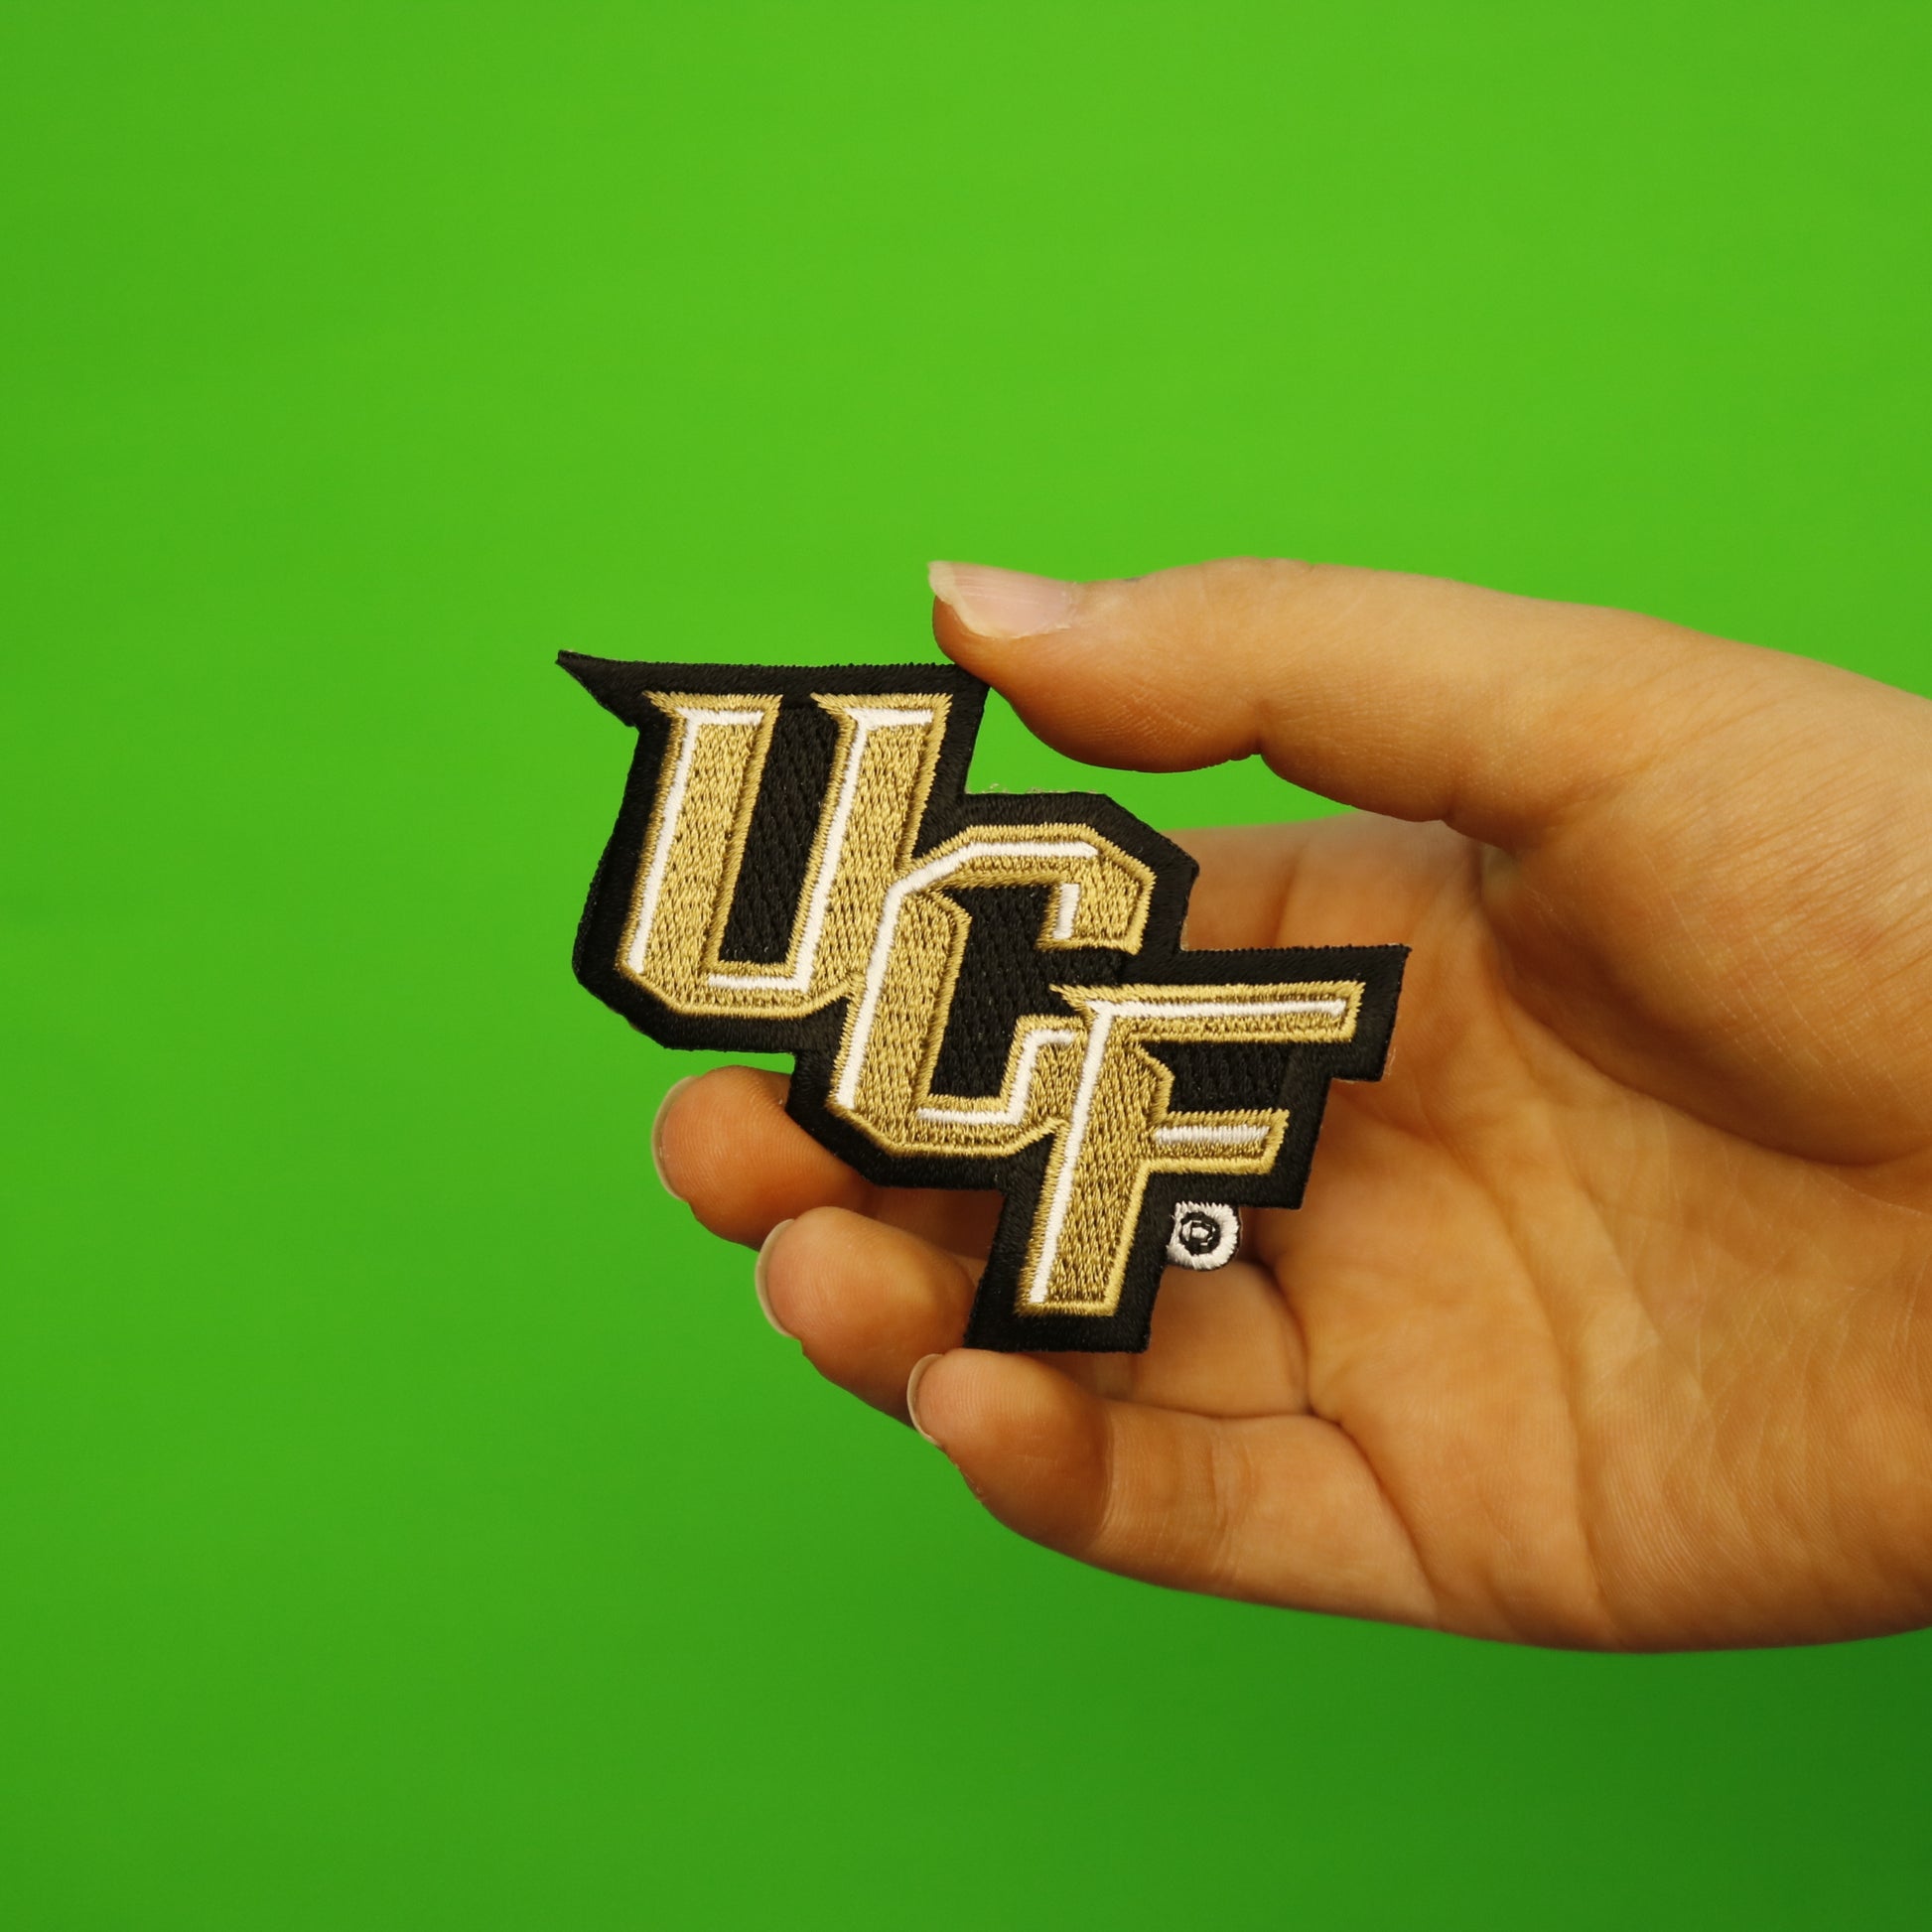 UCF University Of Central Florida Logo Embroidered Iron On Patch 